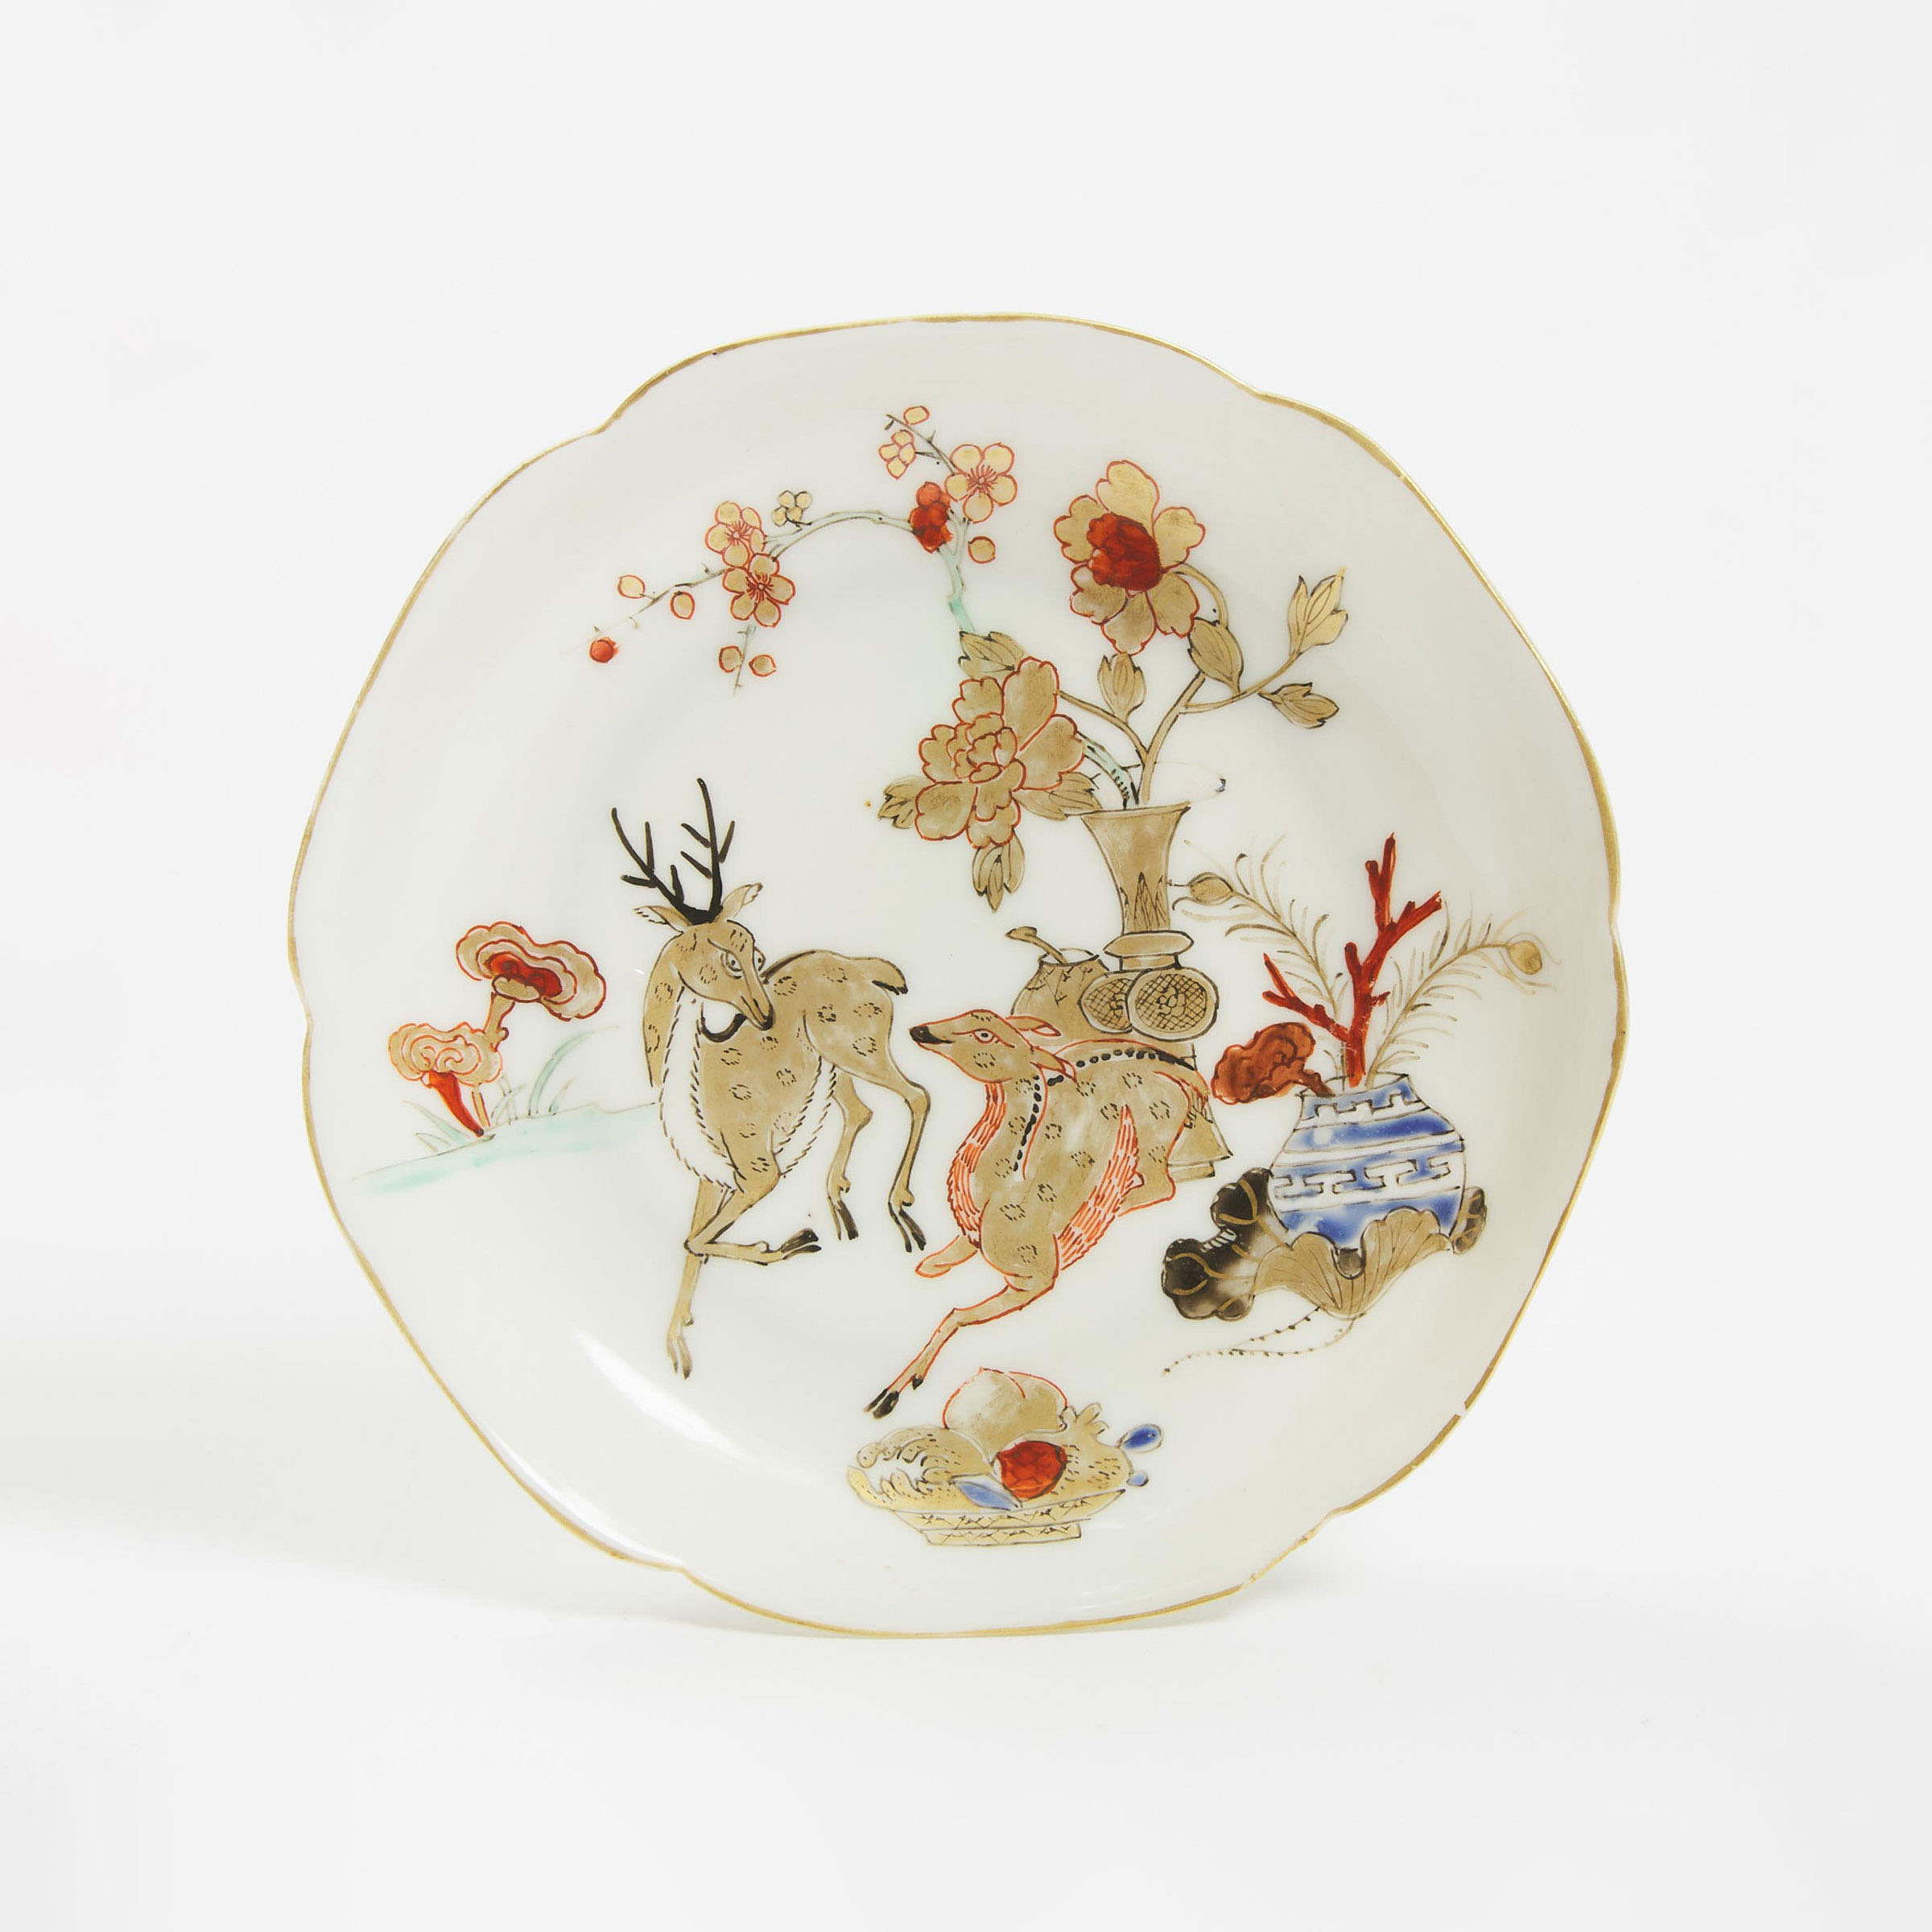 A Gilt and Polychrome Enameled 'Deer' Dish, 18th Century